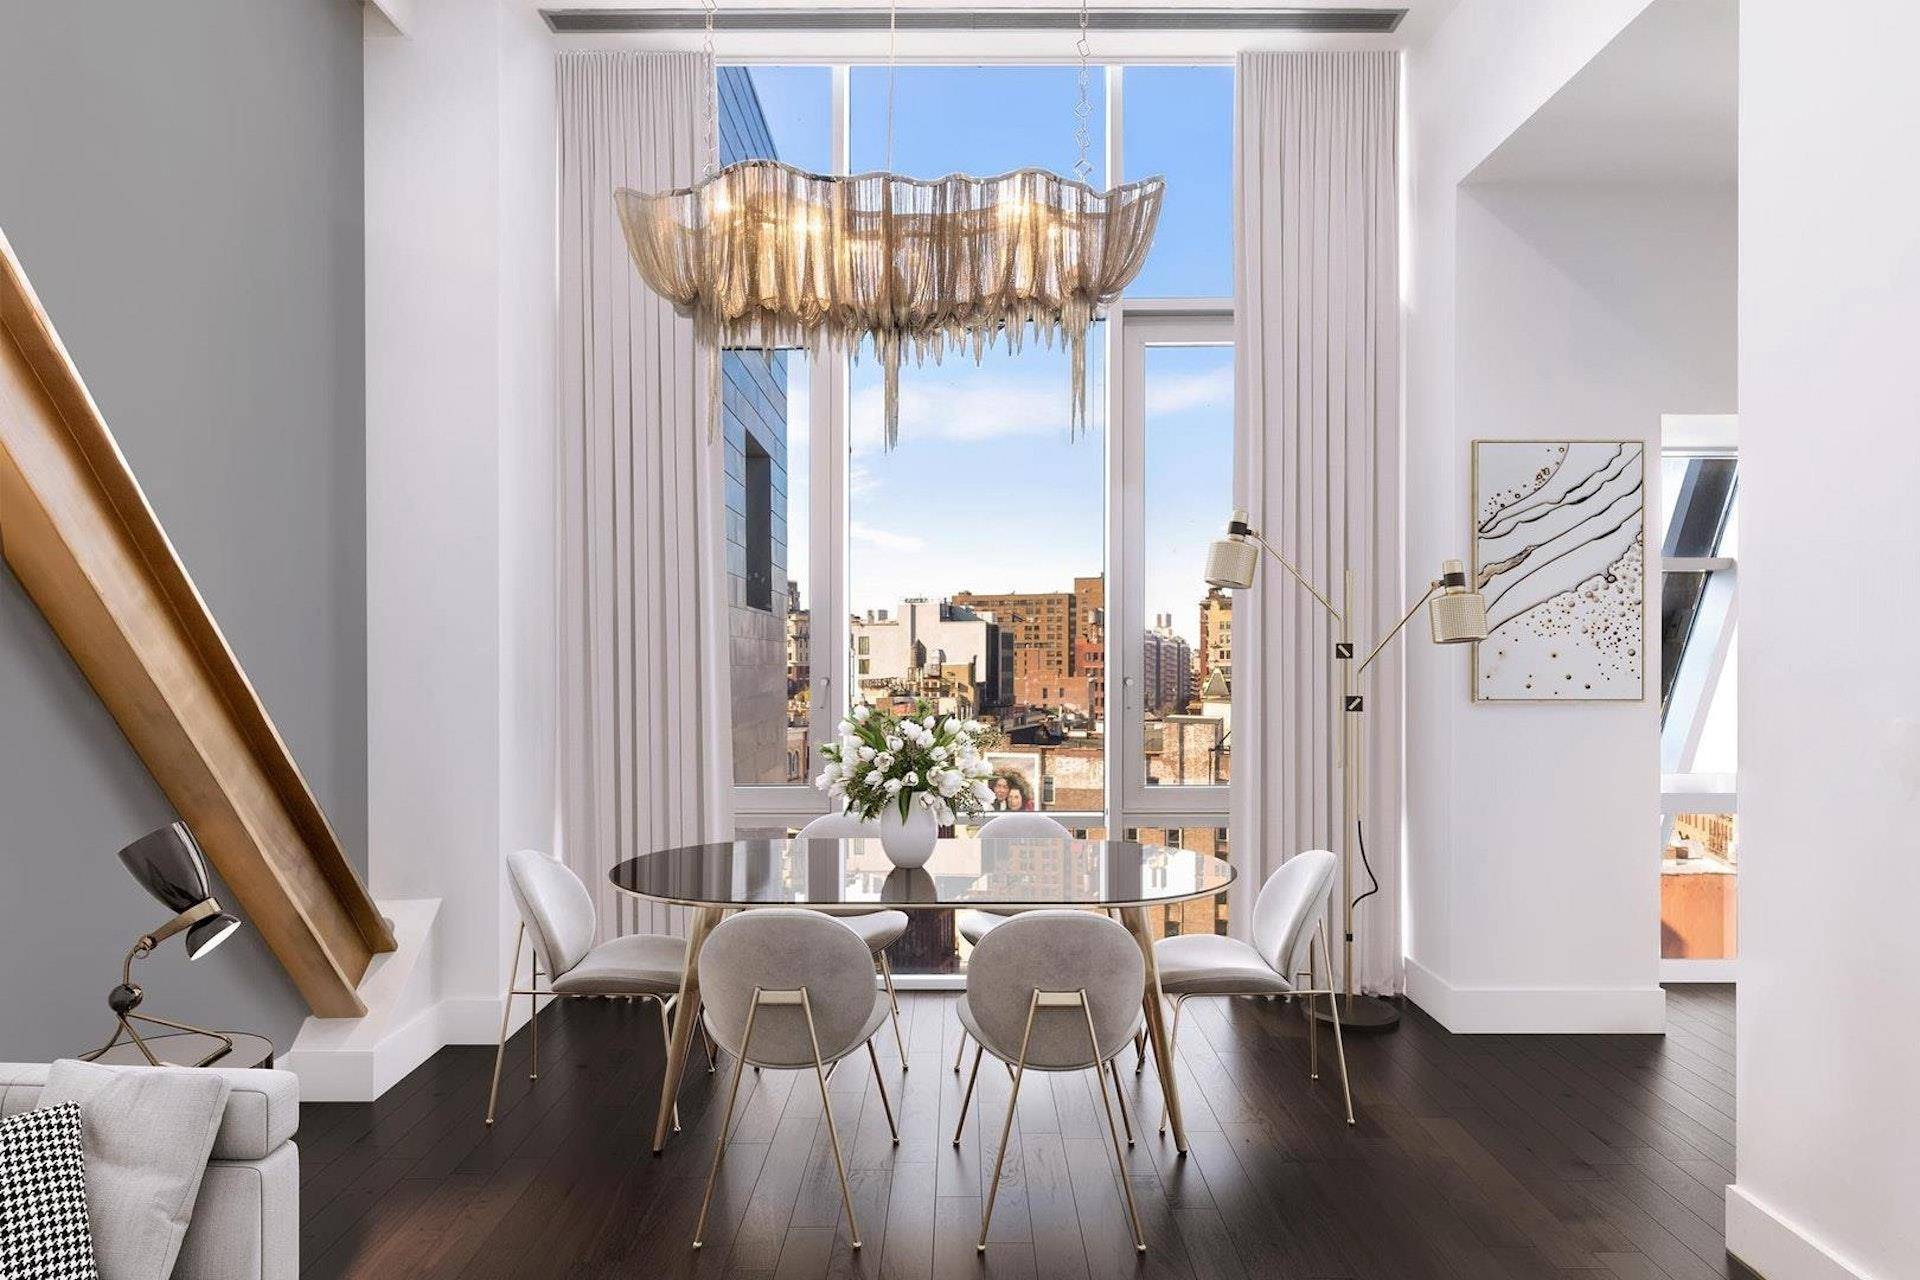 PANORAMIC LIVING Enjoy spectacular space and views from the luminous walls of glass, that make up this fifteen story 'iconic' tower.